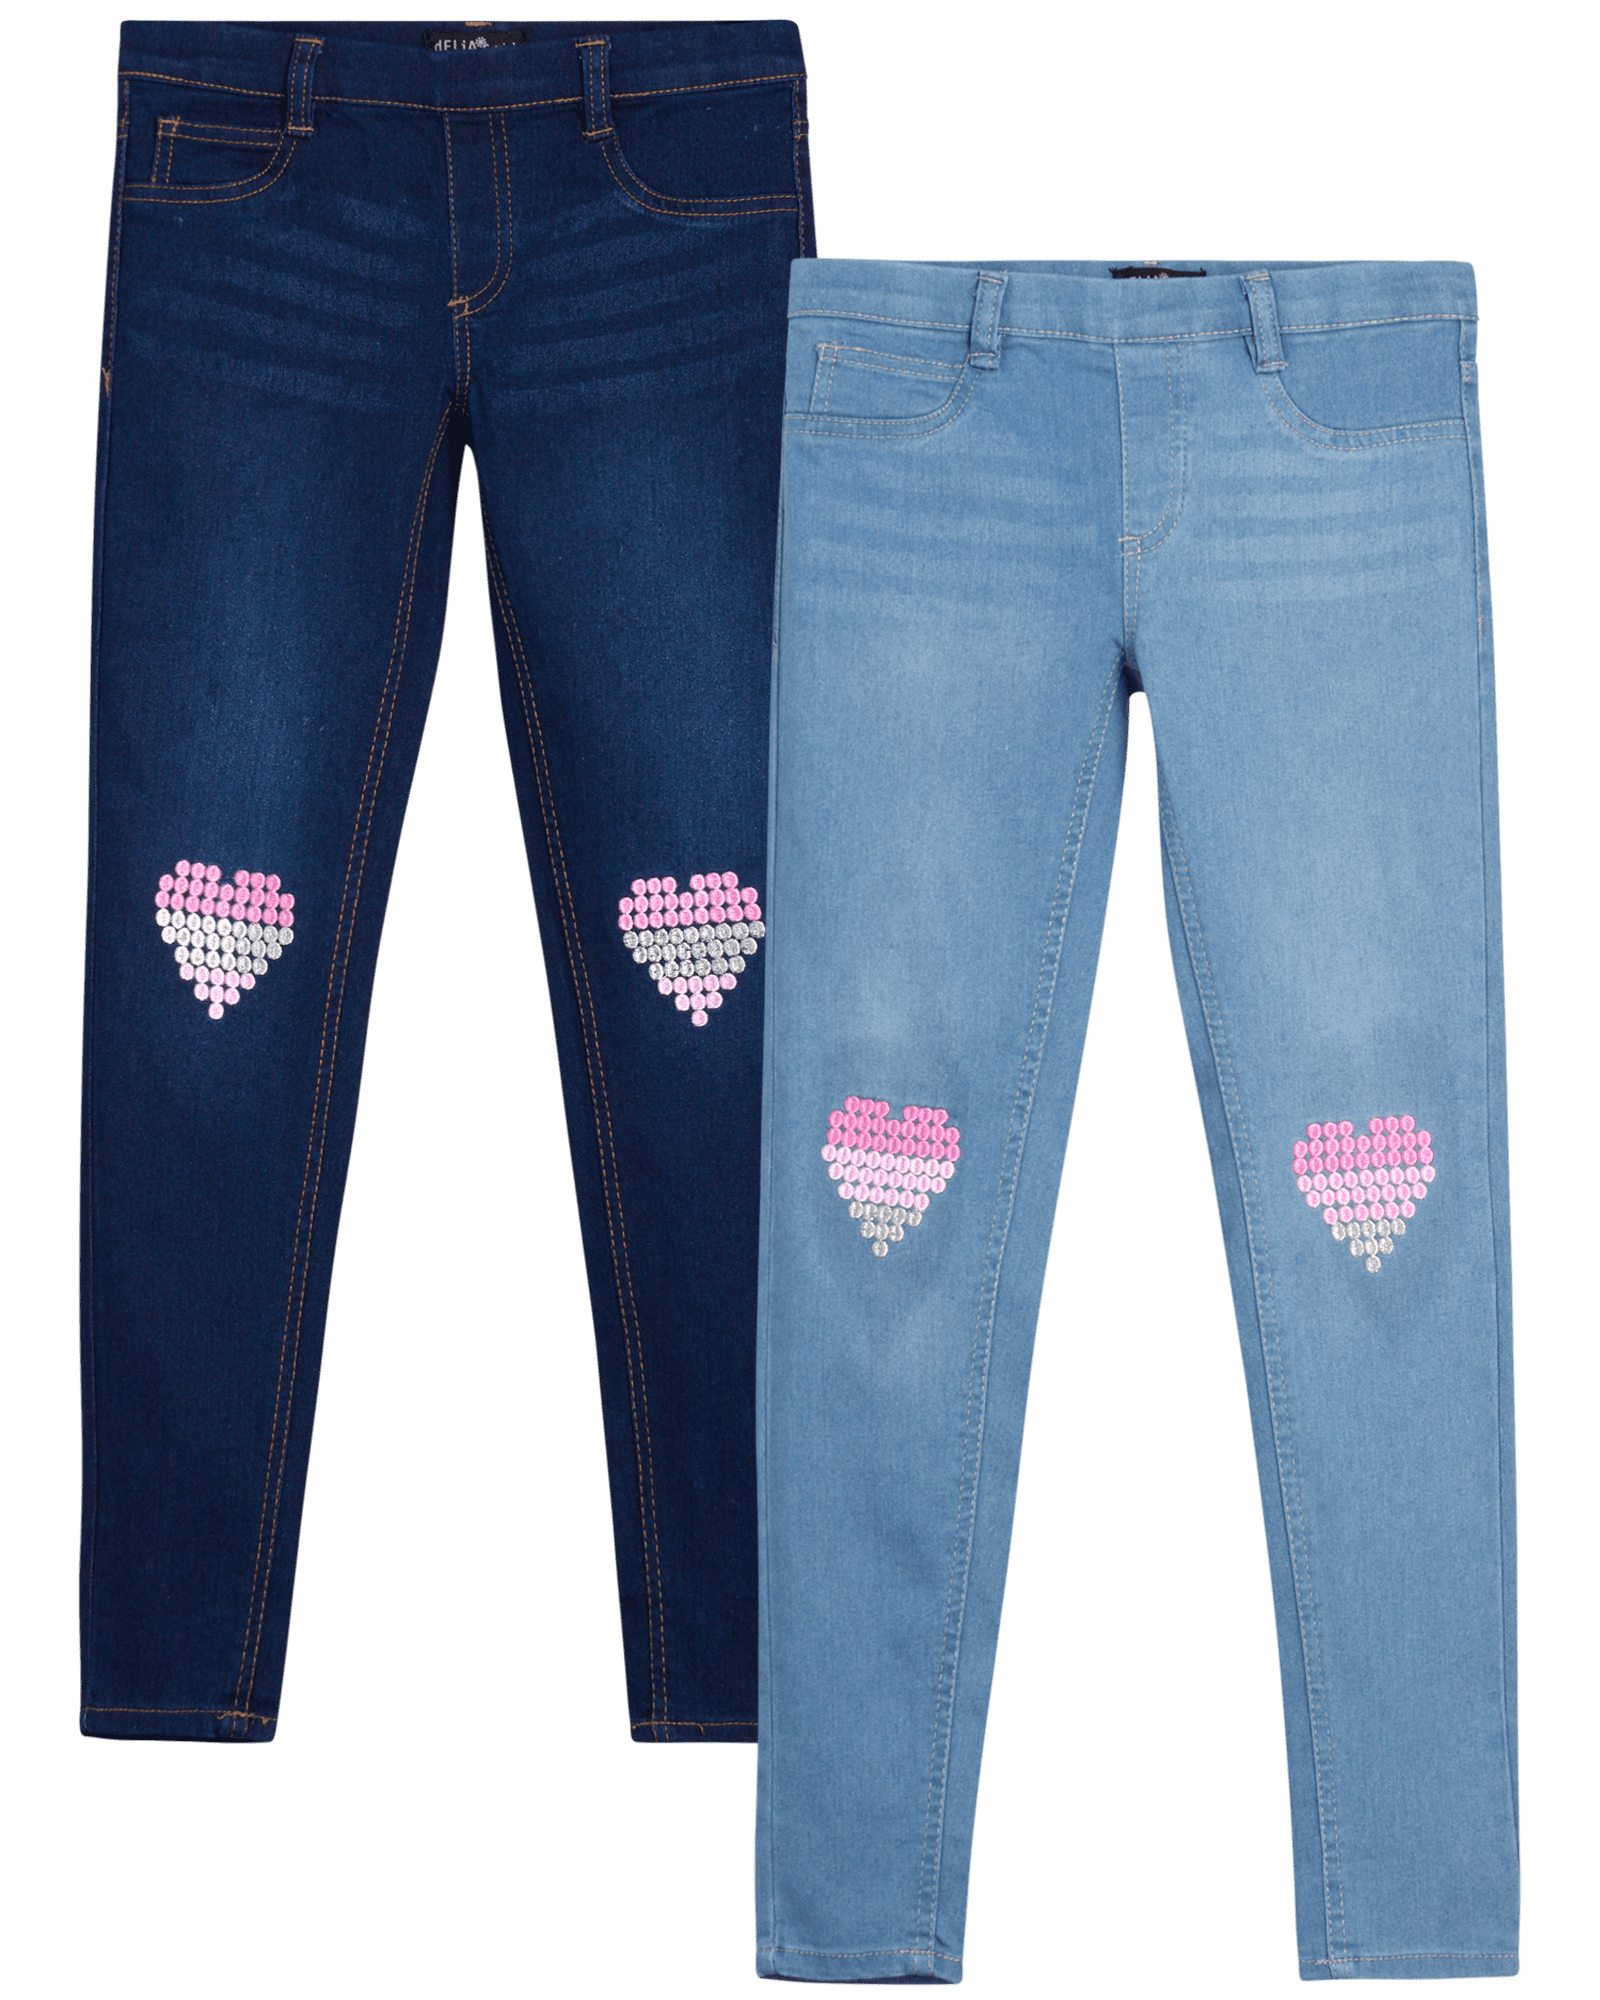 dELiAs Girls’ Super Stretch Denim Jegging Jeans with Critter Embroidery 2 Pack 